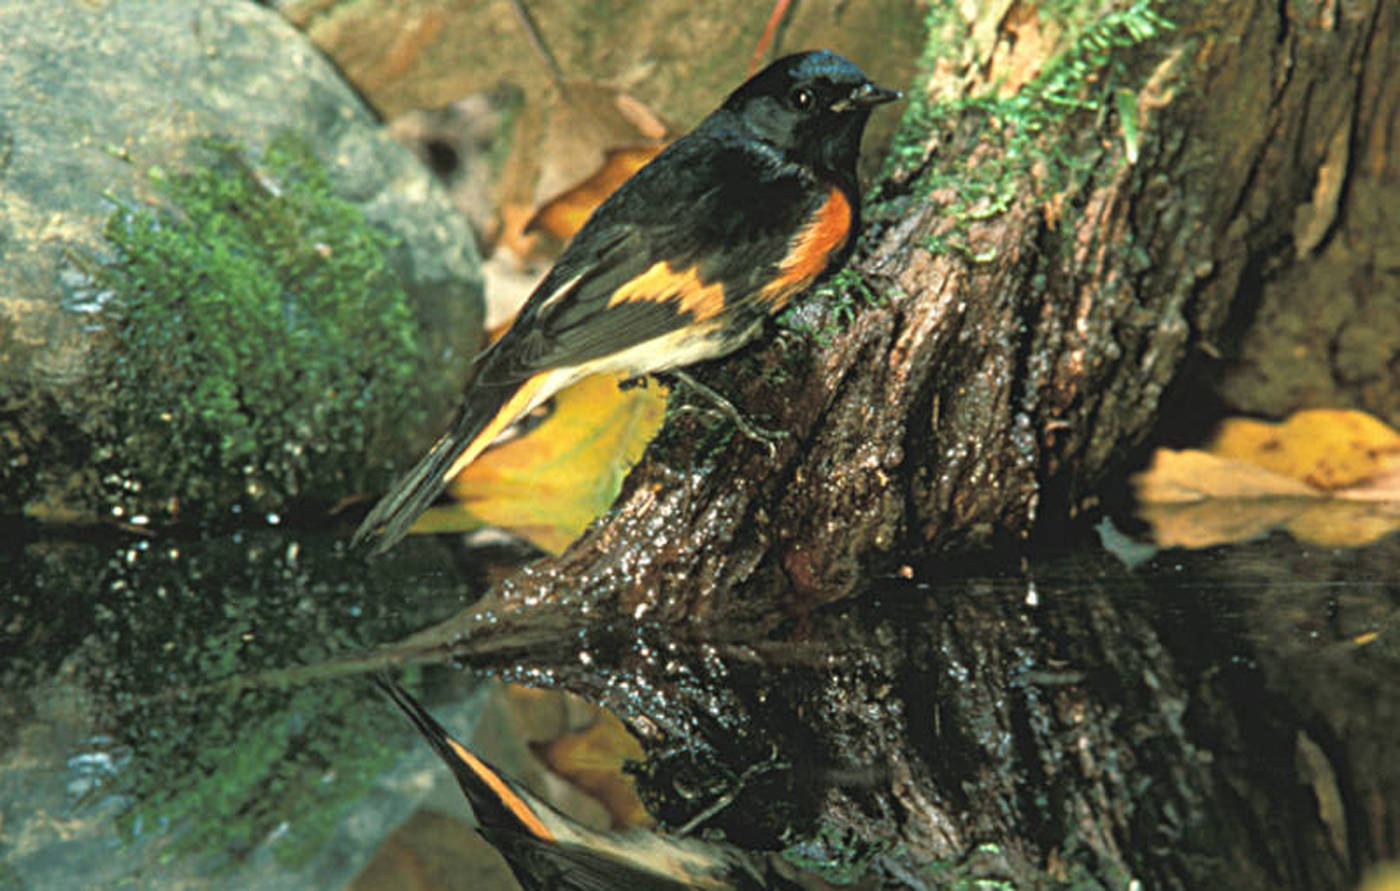 The American Redstart currently breeds in eastern United States and southern Canada, but climate warming may make the Kenai Peninsula a suitable place for it to live by the end of this century. (Photo by S. Maslowski, USFWS)